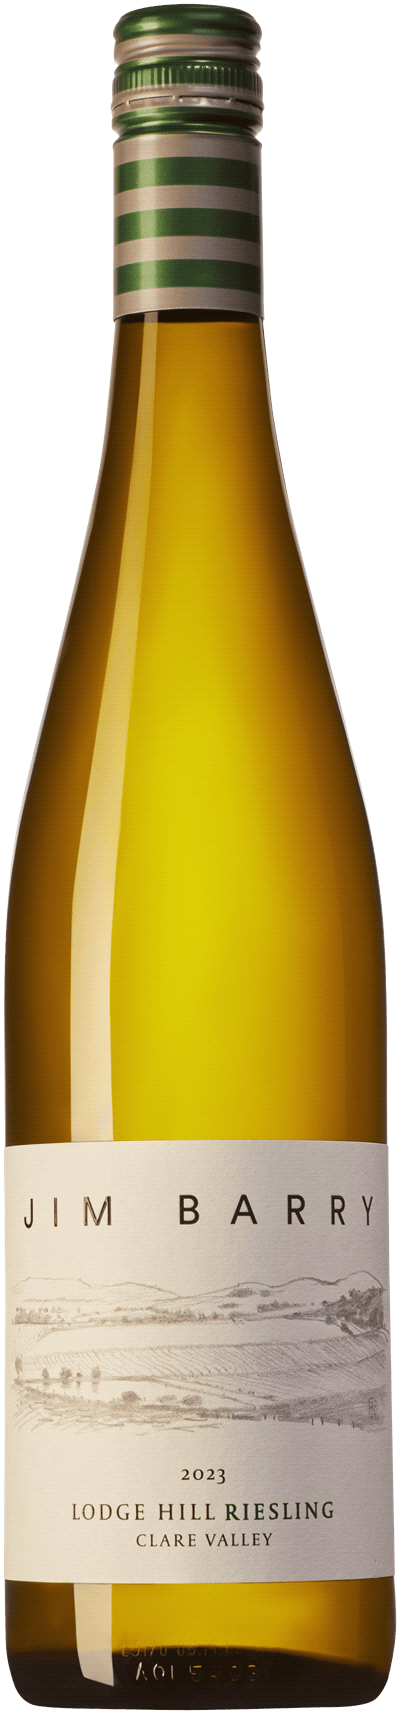 Lodge Hill Riesling